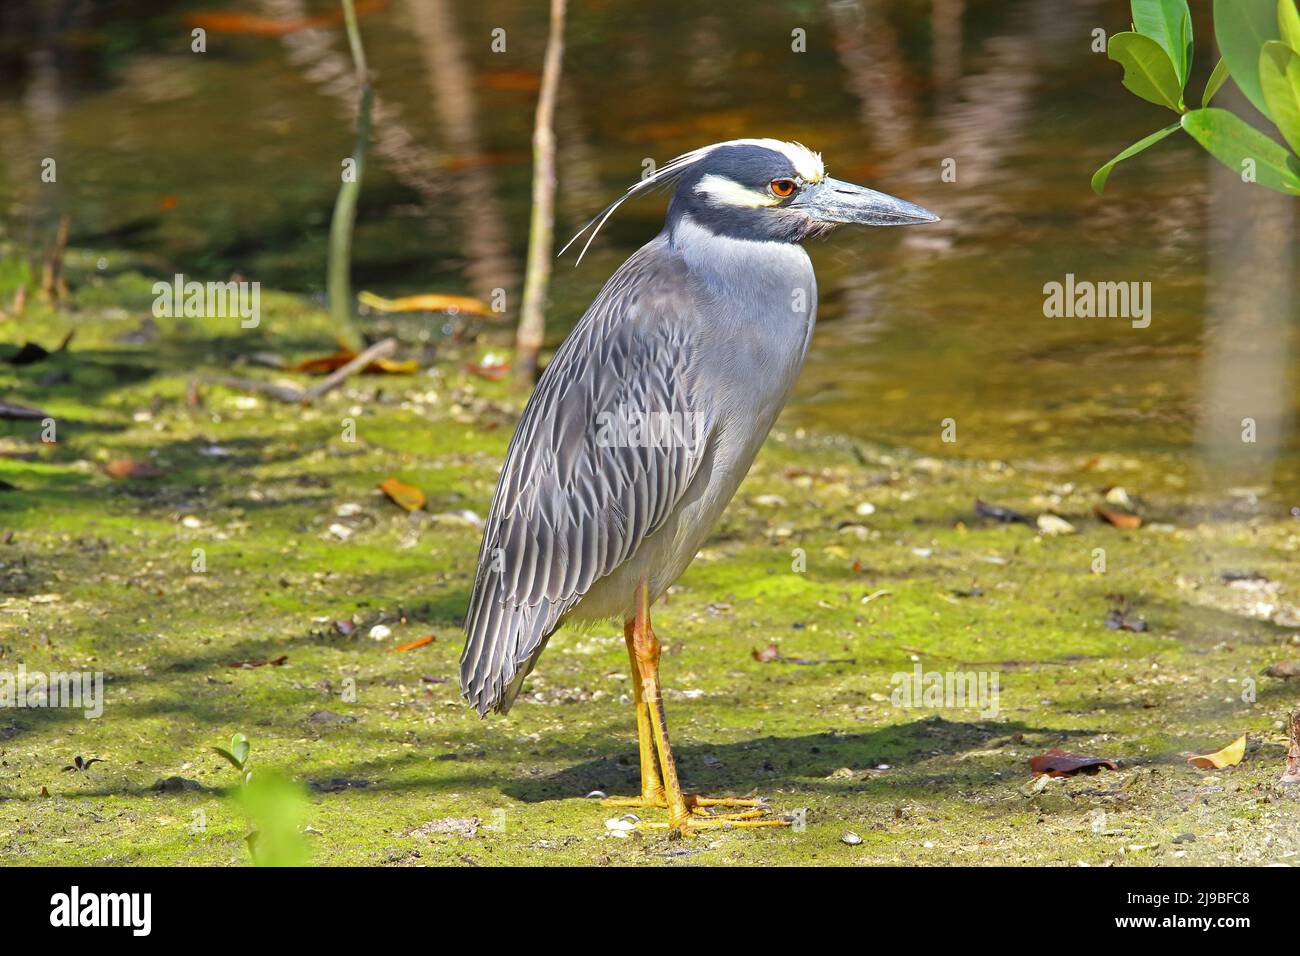 Yellow crowned night heron in the swamp Stock Photo